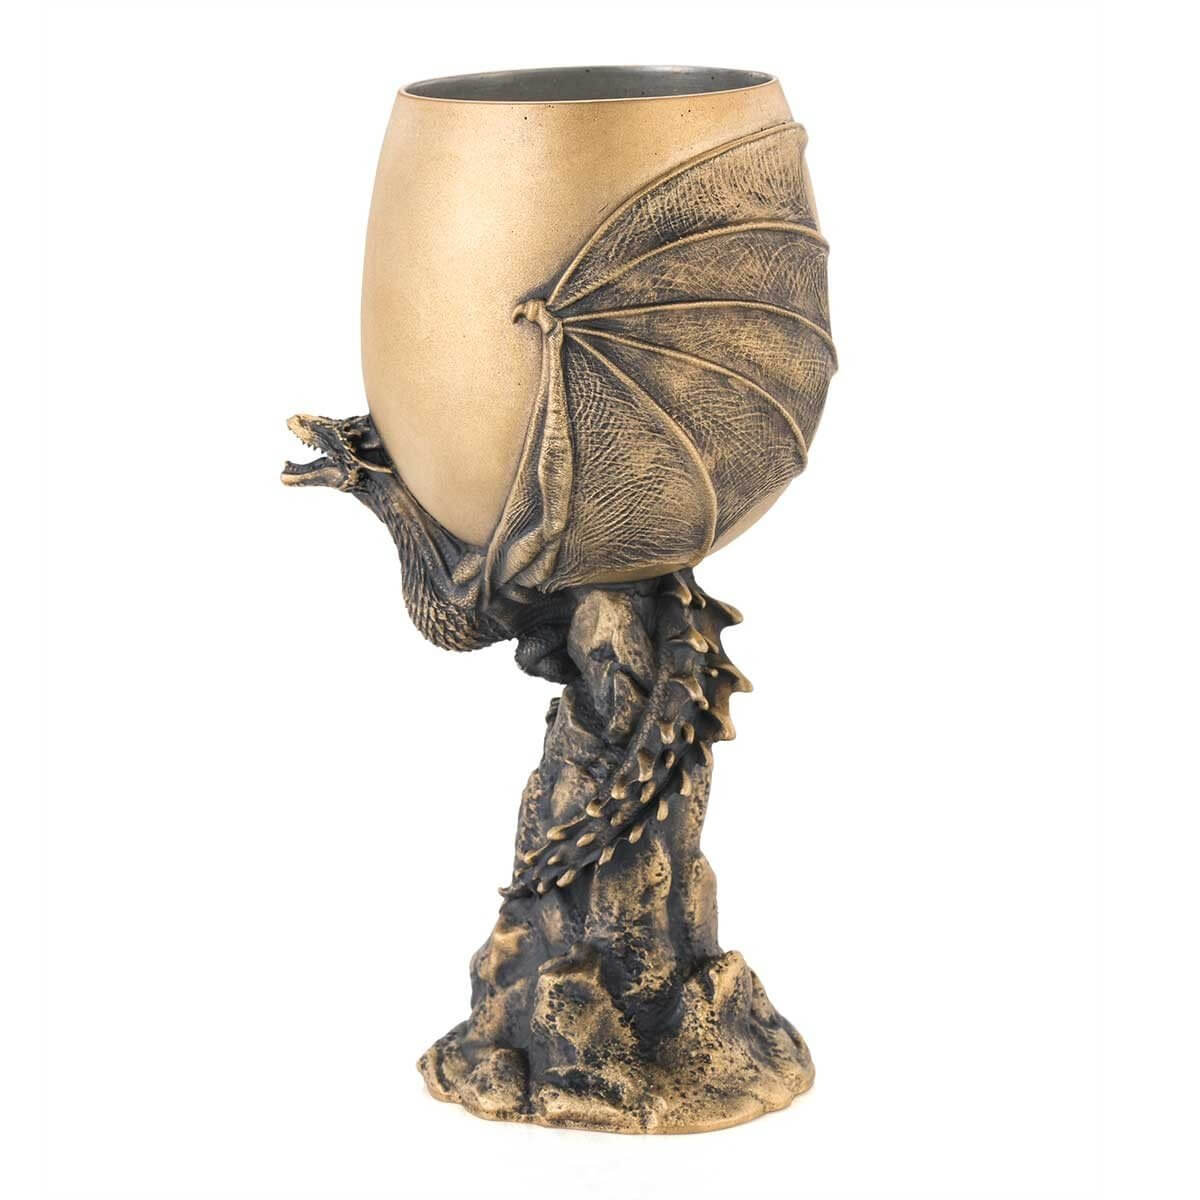 Limited Edition Gold Drogon Goblet - Game of Thrones Collectible Gift